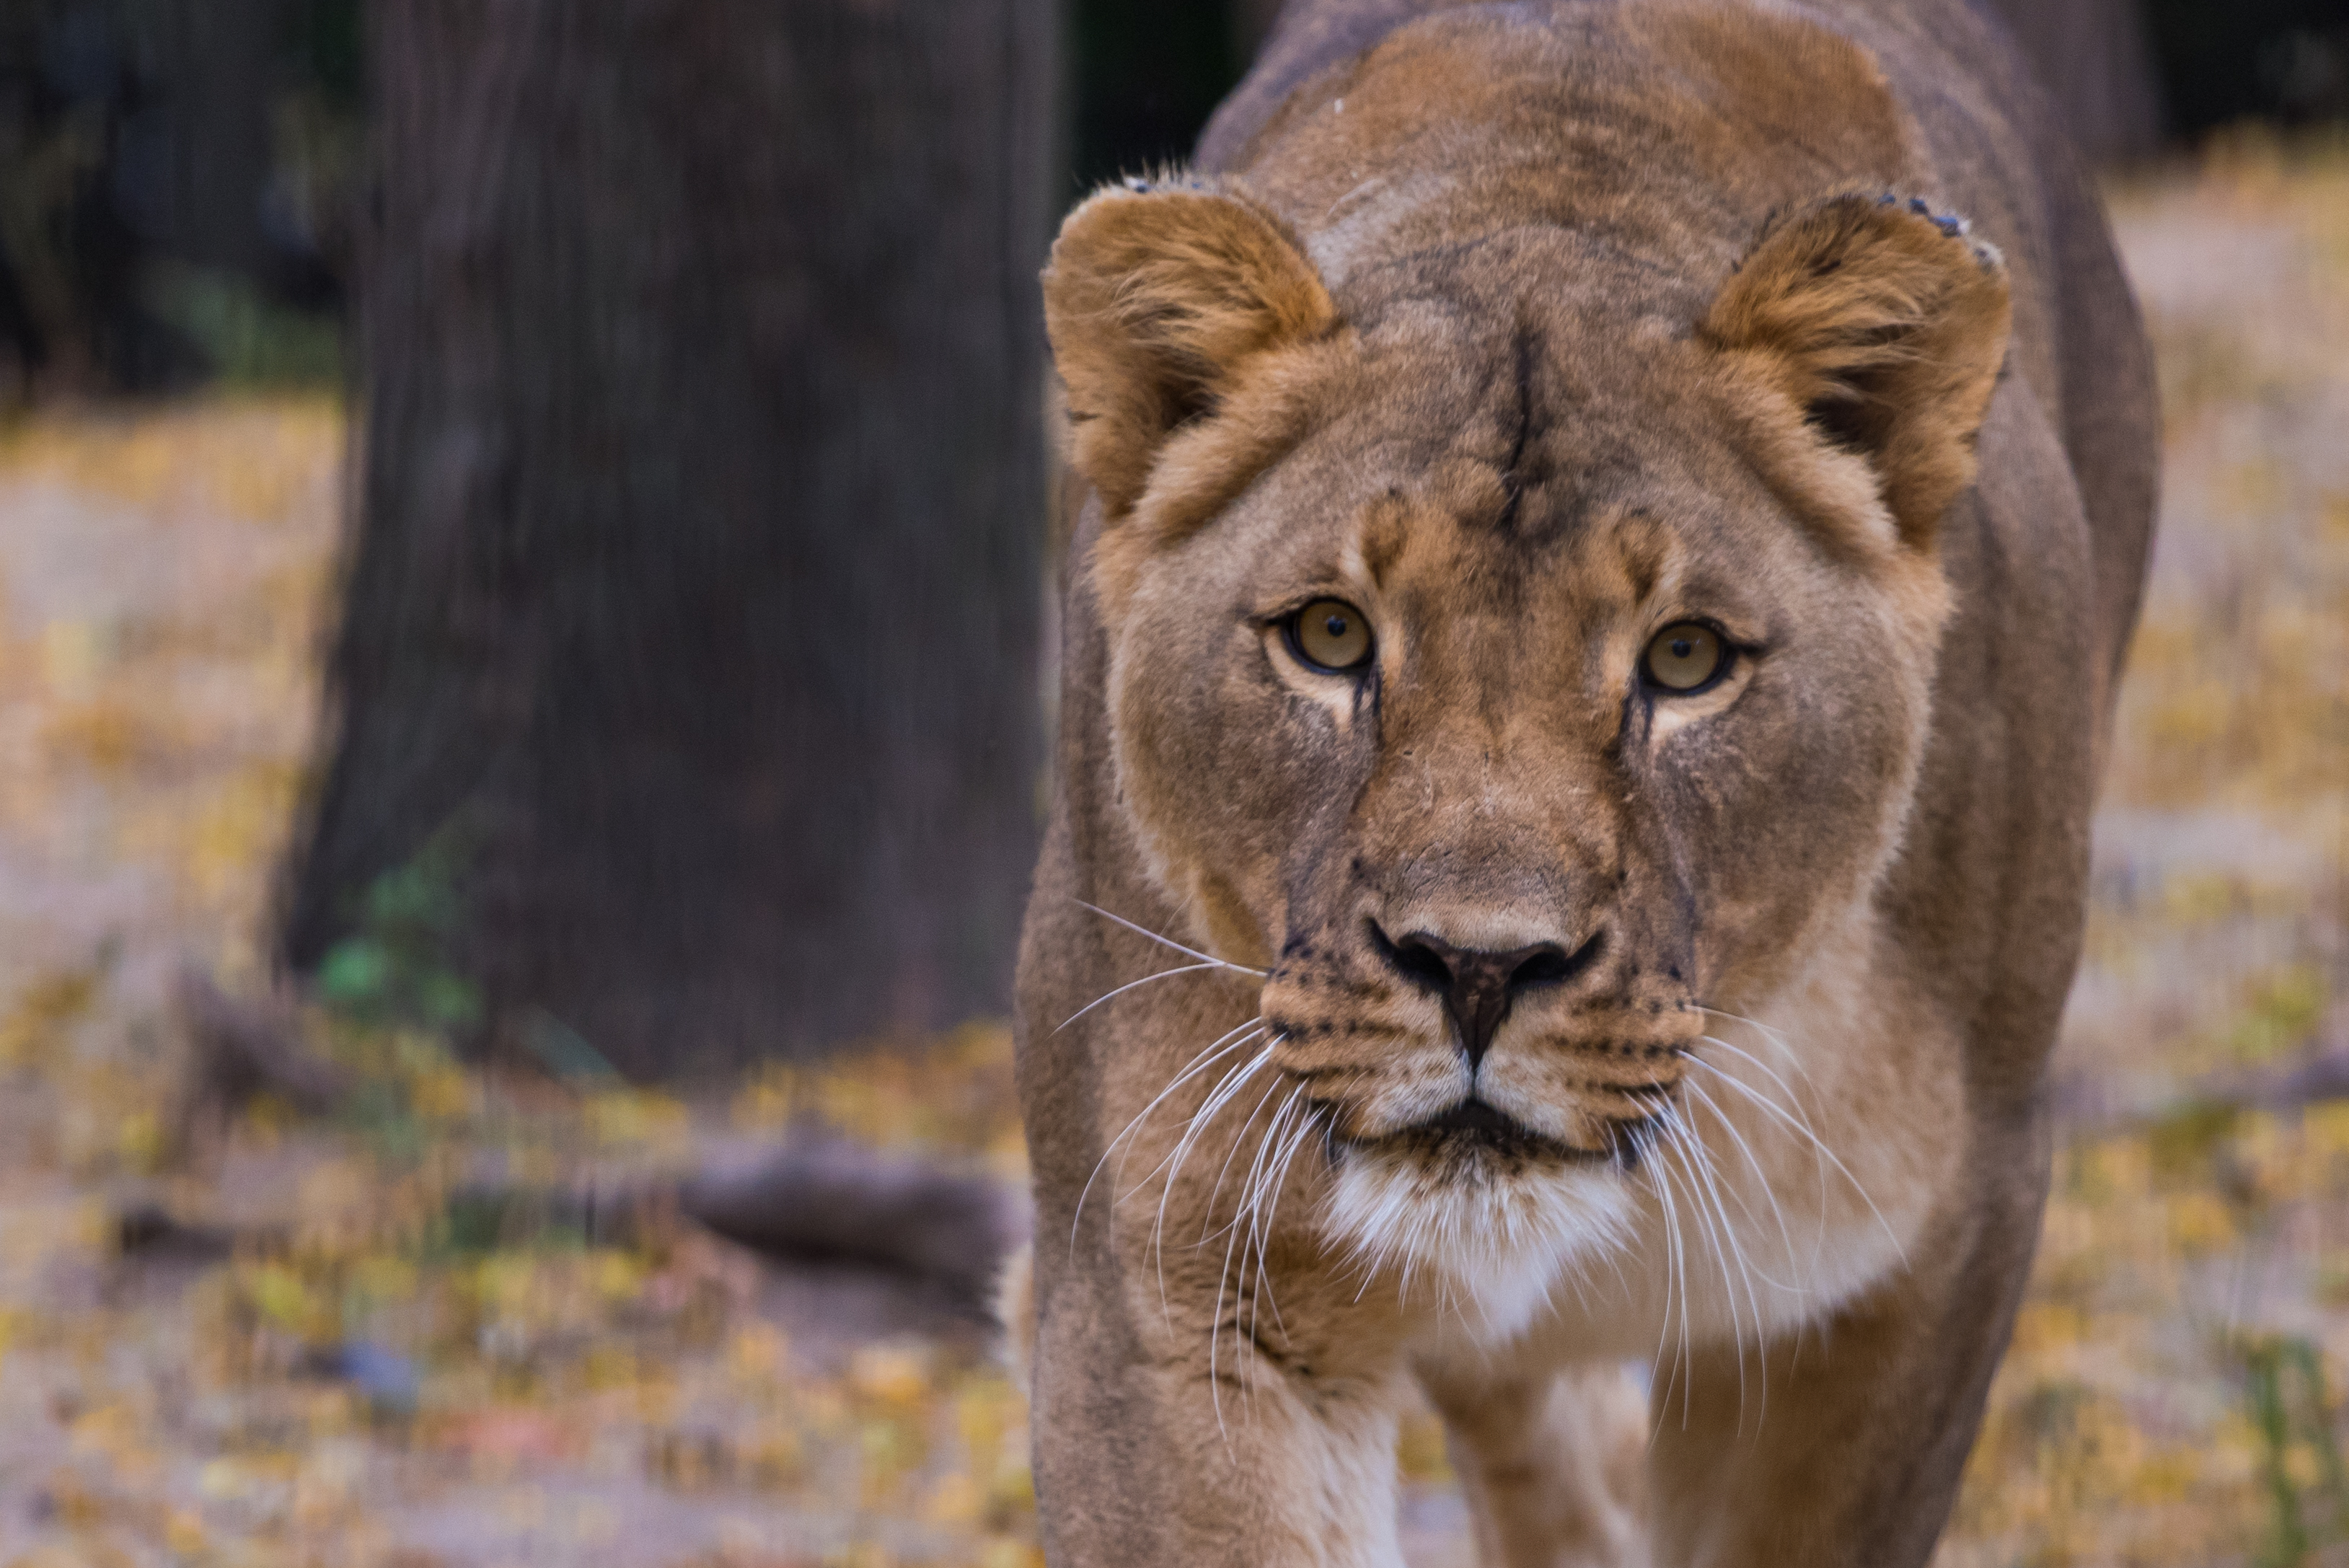 Female African lion at Topeka Zoo and Conservation Center